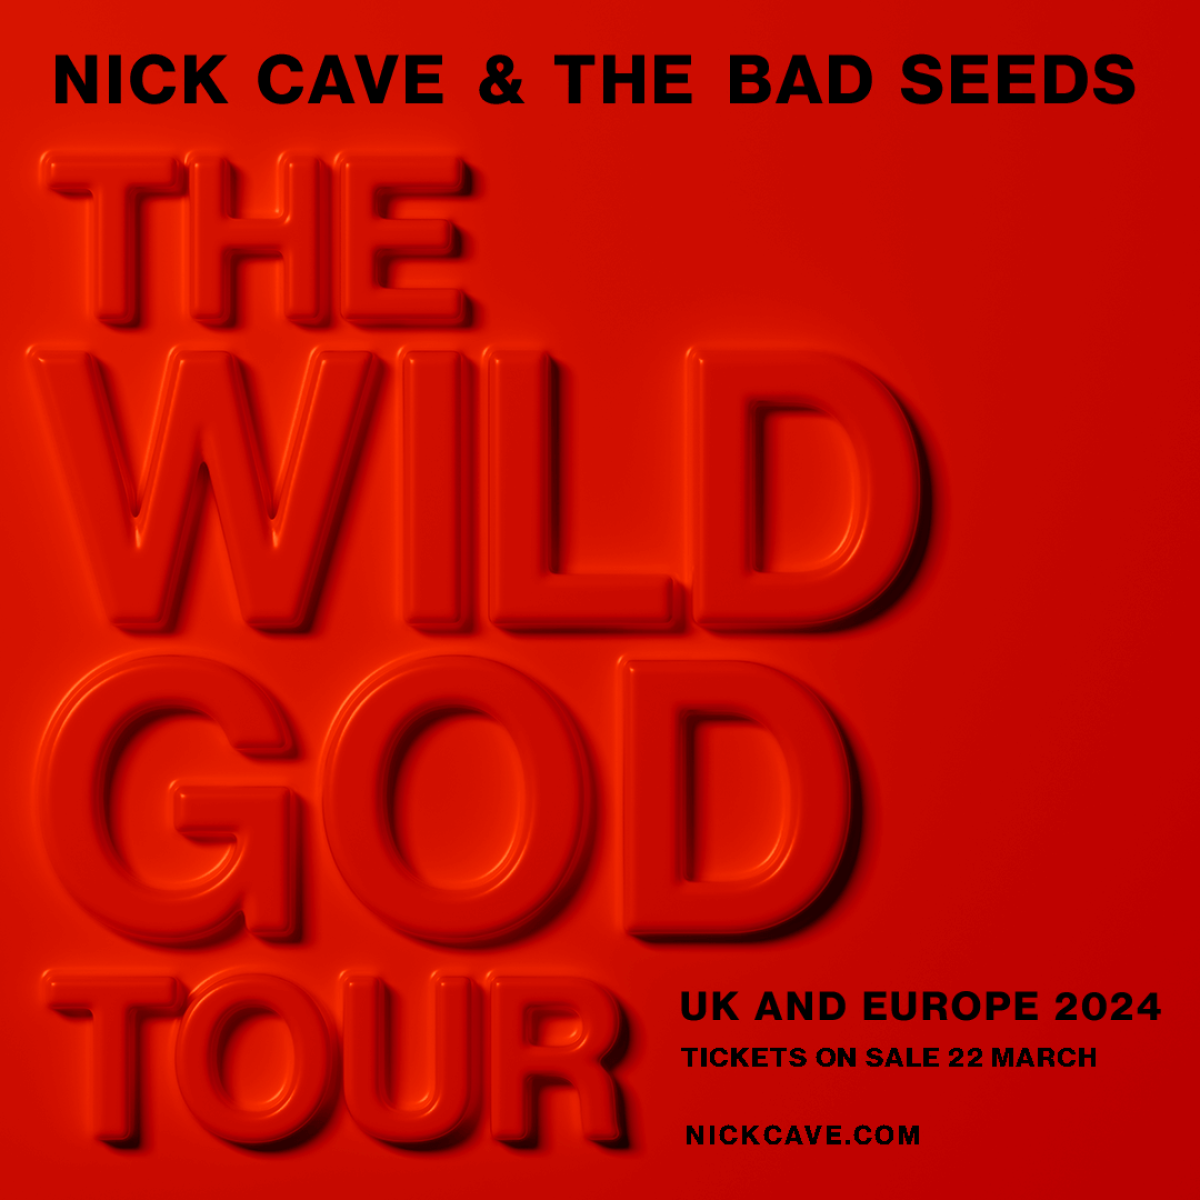 Billets Nick Cave and the Bad Seeds - The Wild God Tour (Olympiahalle Munchen - Munich)